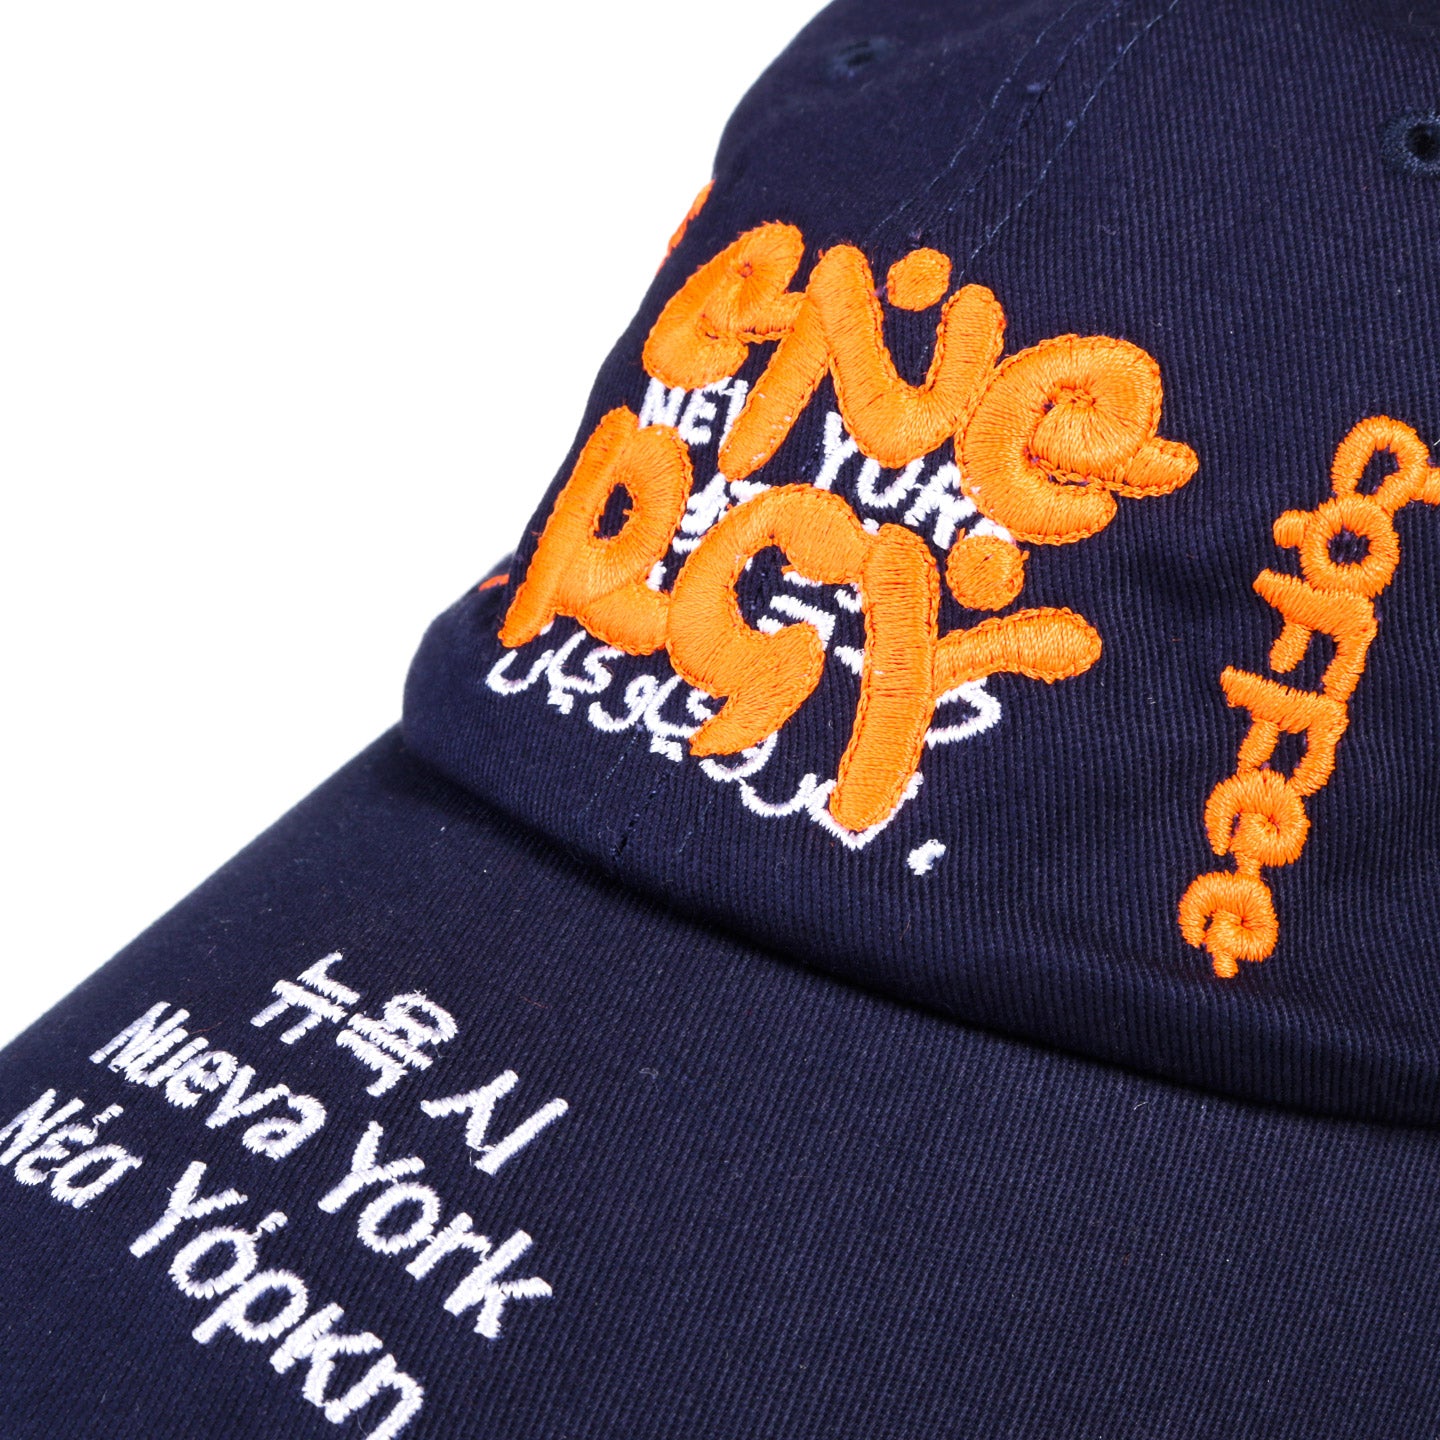 YOUNG COFFEE ENERGY HAT NAVY